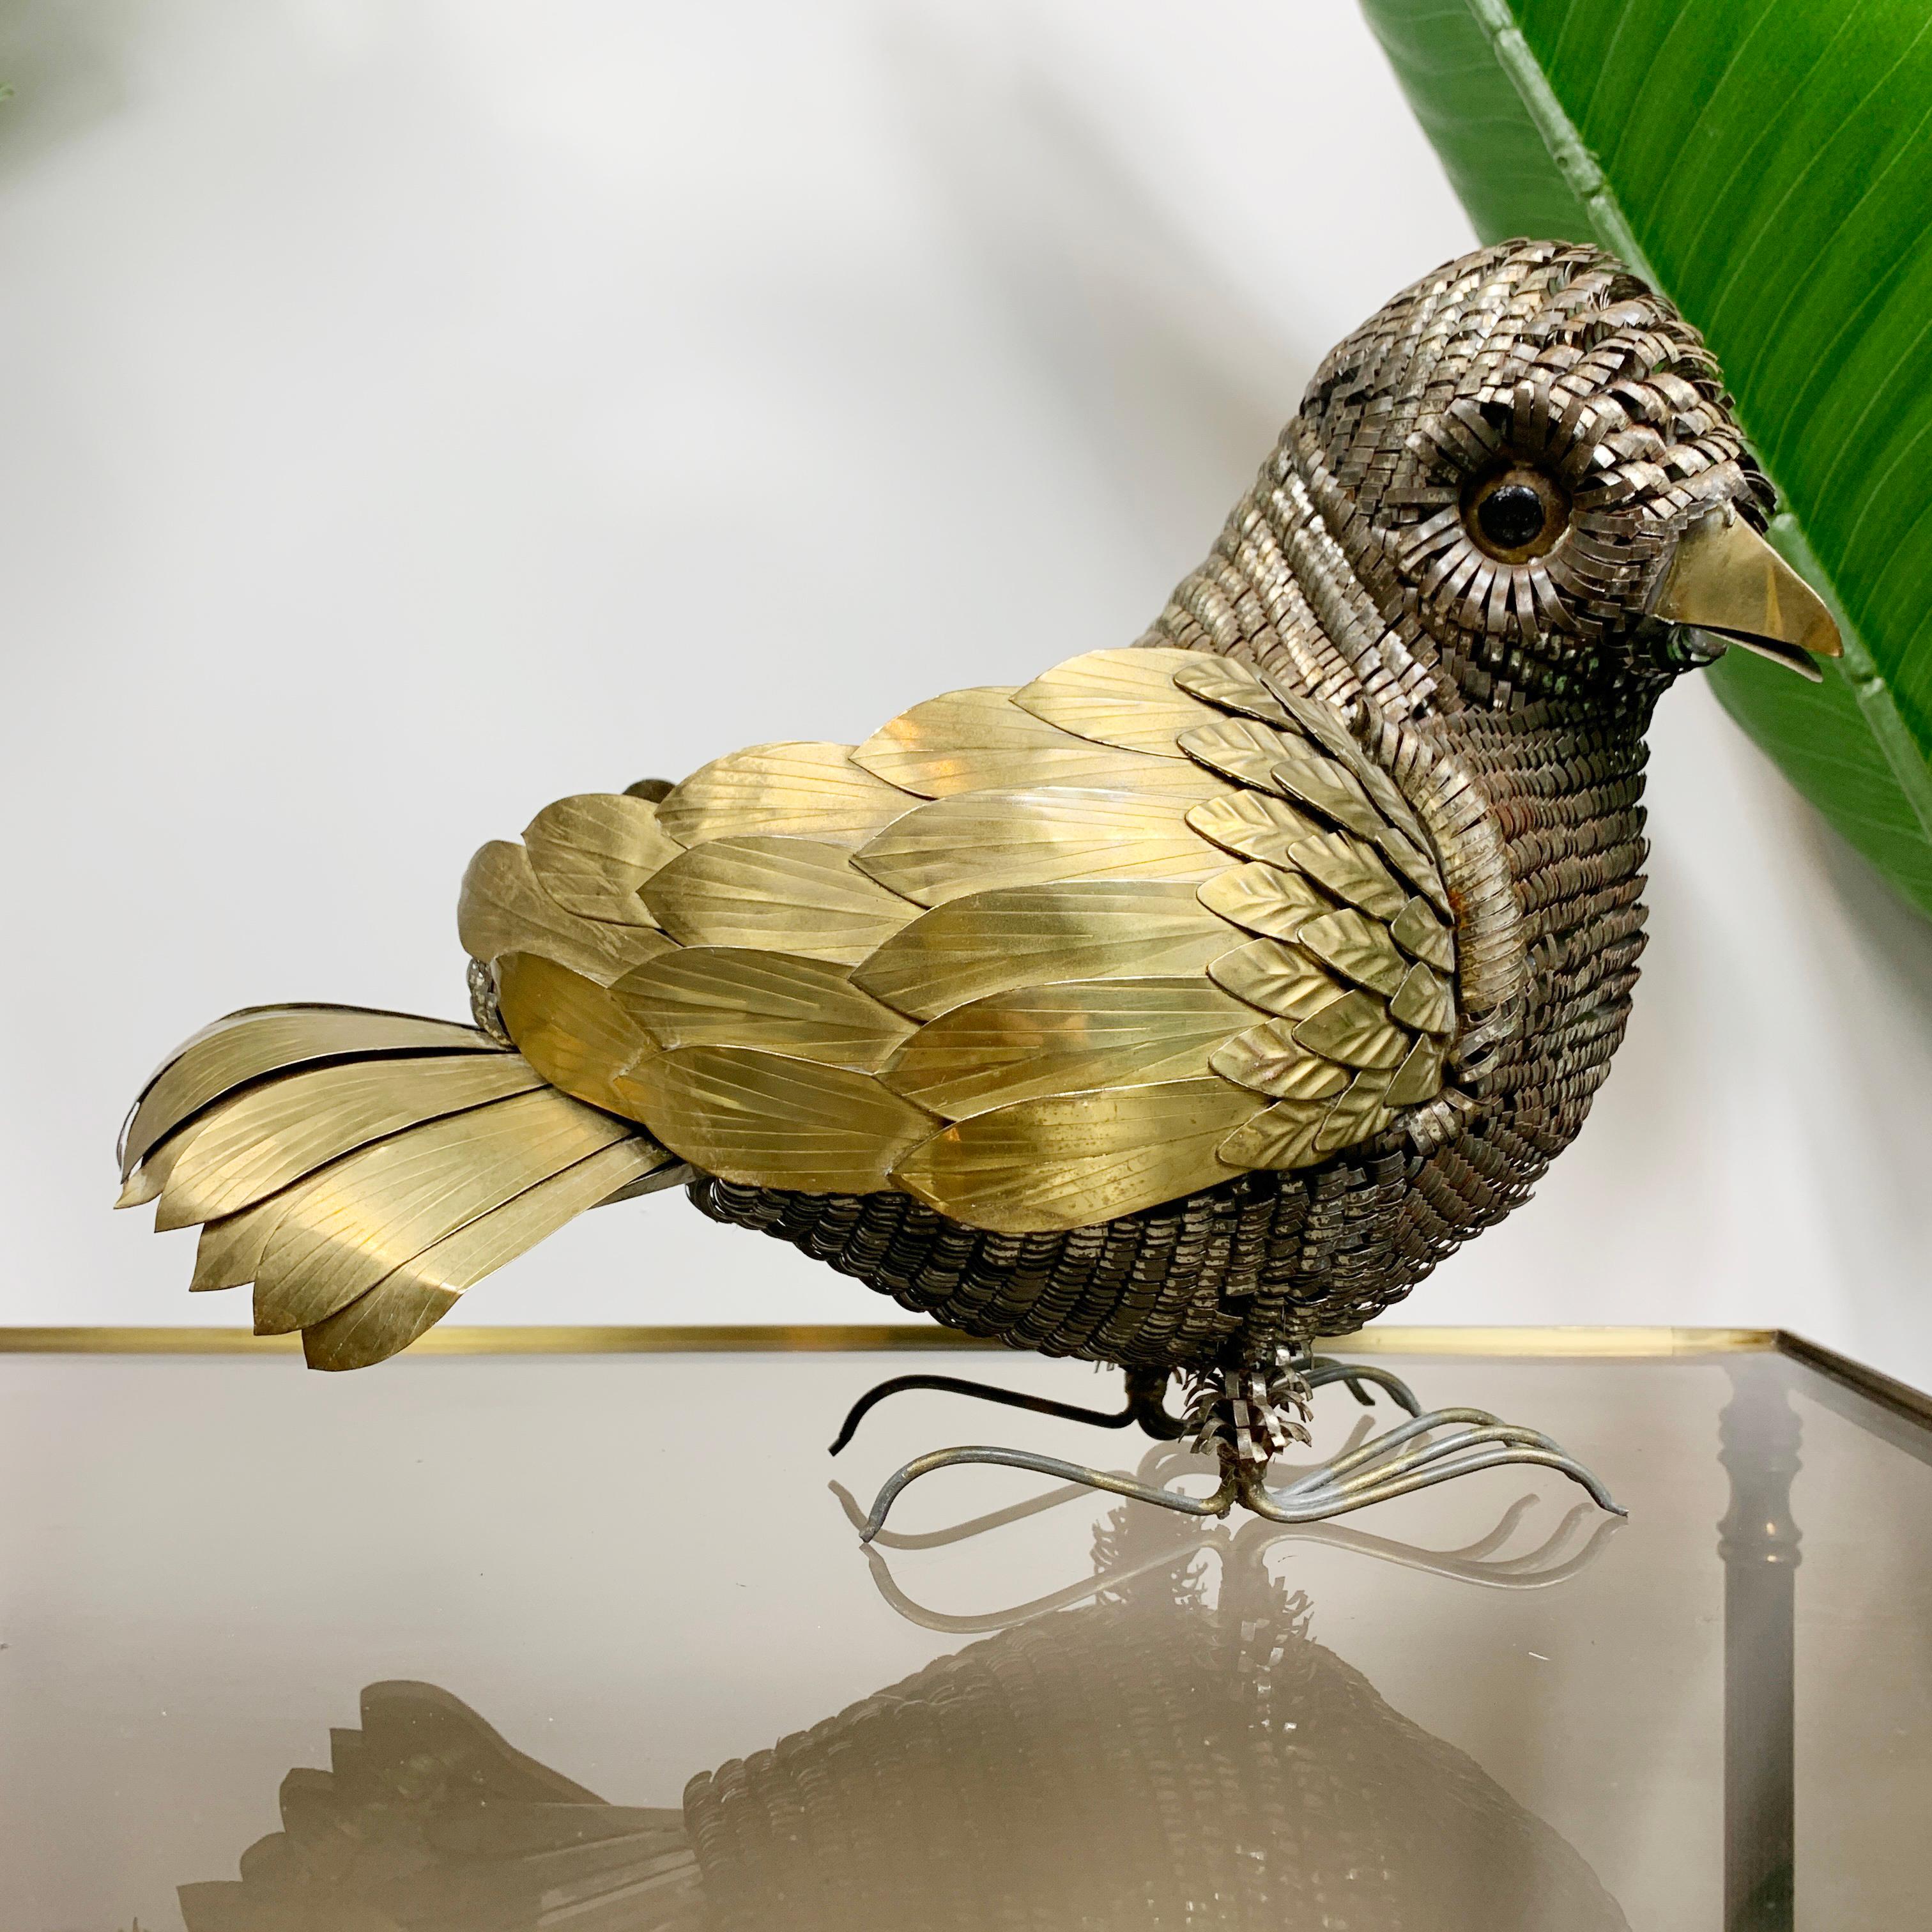 Sergio Bustamante Song Bird Sculpture, C 1970
Fabulous mixed metal bird sculpture constructed of cut tin and brass fabricated by Mexican artist Sergio Bustamante
21cm Height, 28cm Length, 16cm Depth
Some of the silver metal work has aged patina
